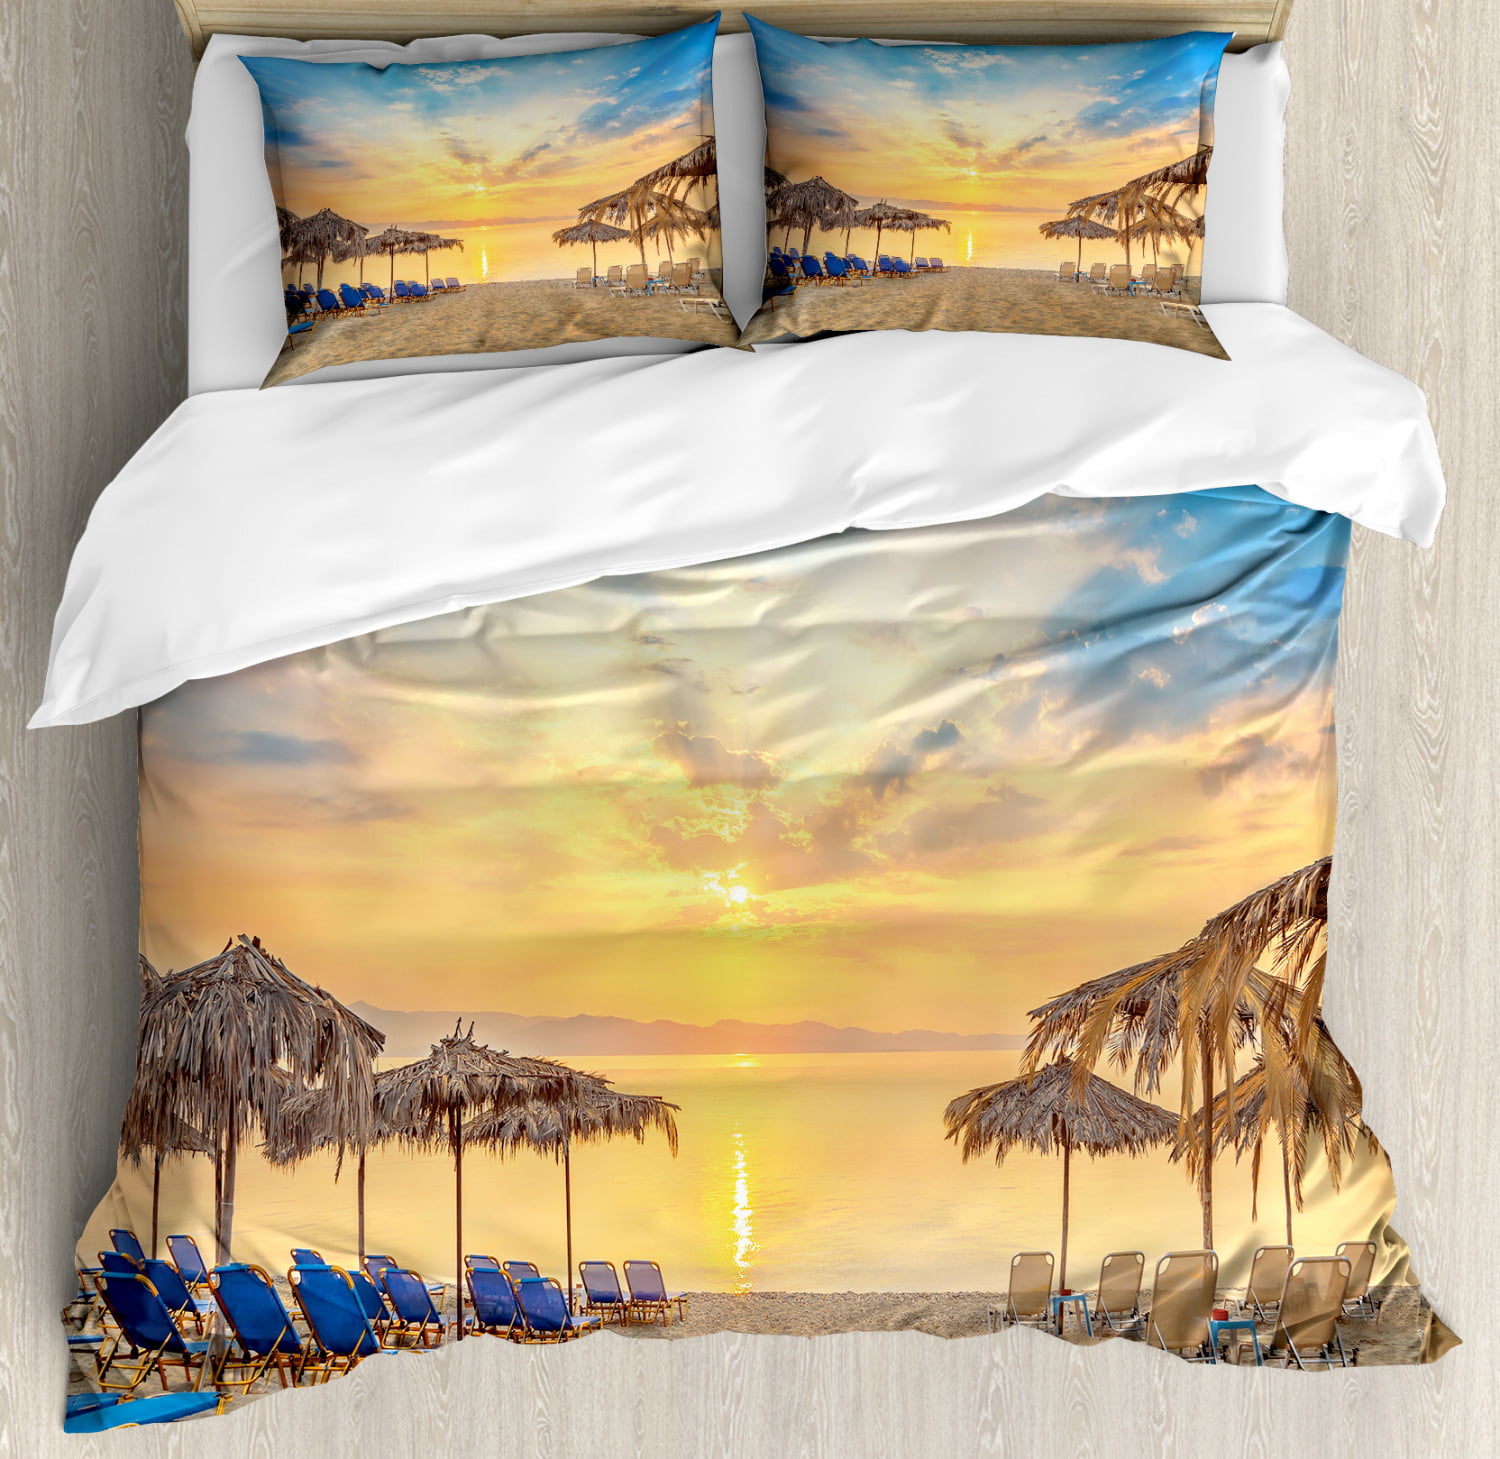 Summer Decor Queen Size Duvet Cover Set, What Do You Put In A Duvet Cover The Summer